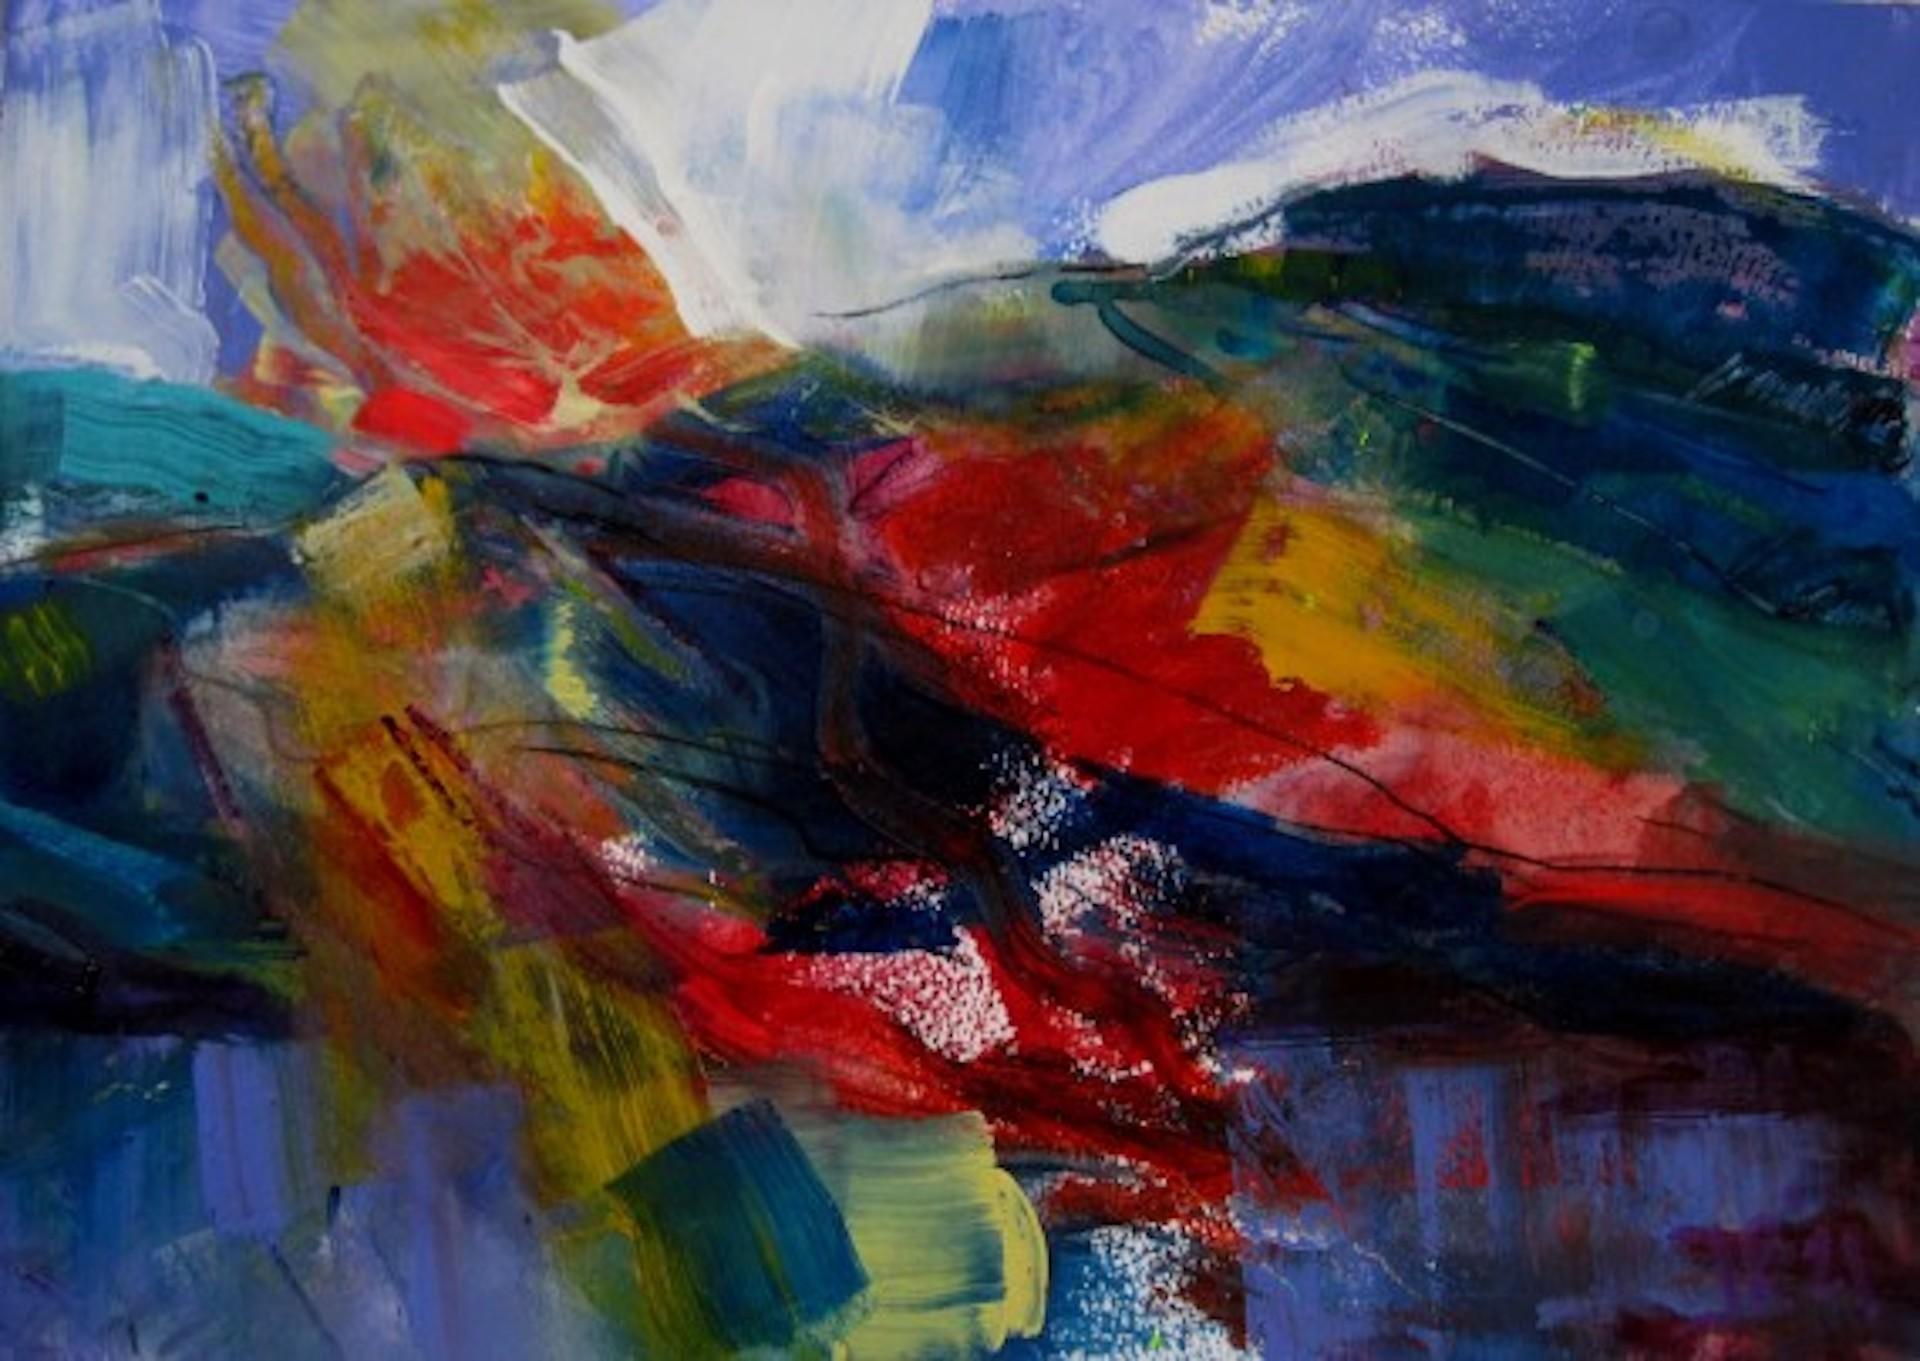 Shoreline – Jon Rowland – Contemporary abstract expressionism [2021]

original
Acrylic, and oil on paper
Image size: H:21 cm x W:30 cm
Complete Size of Unframed Work: H:21 cm x W:30 cm x D:A3cm
Sold Unframed
Please note that insitu images are purely